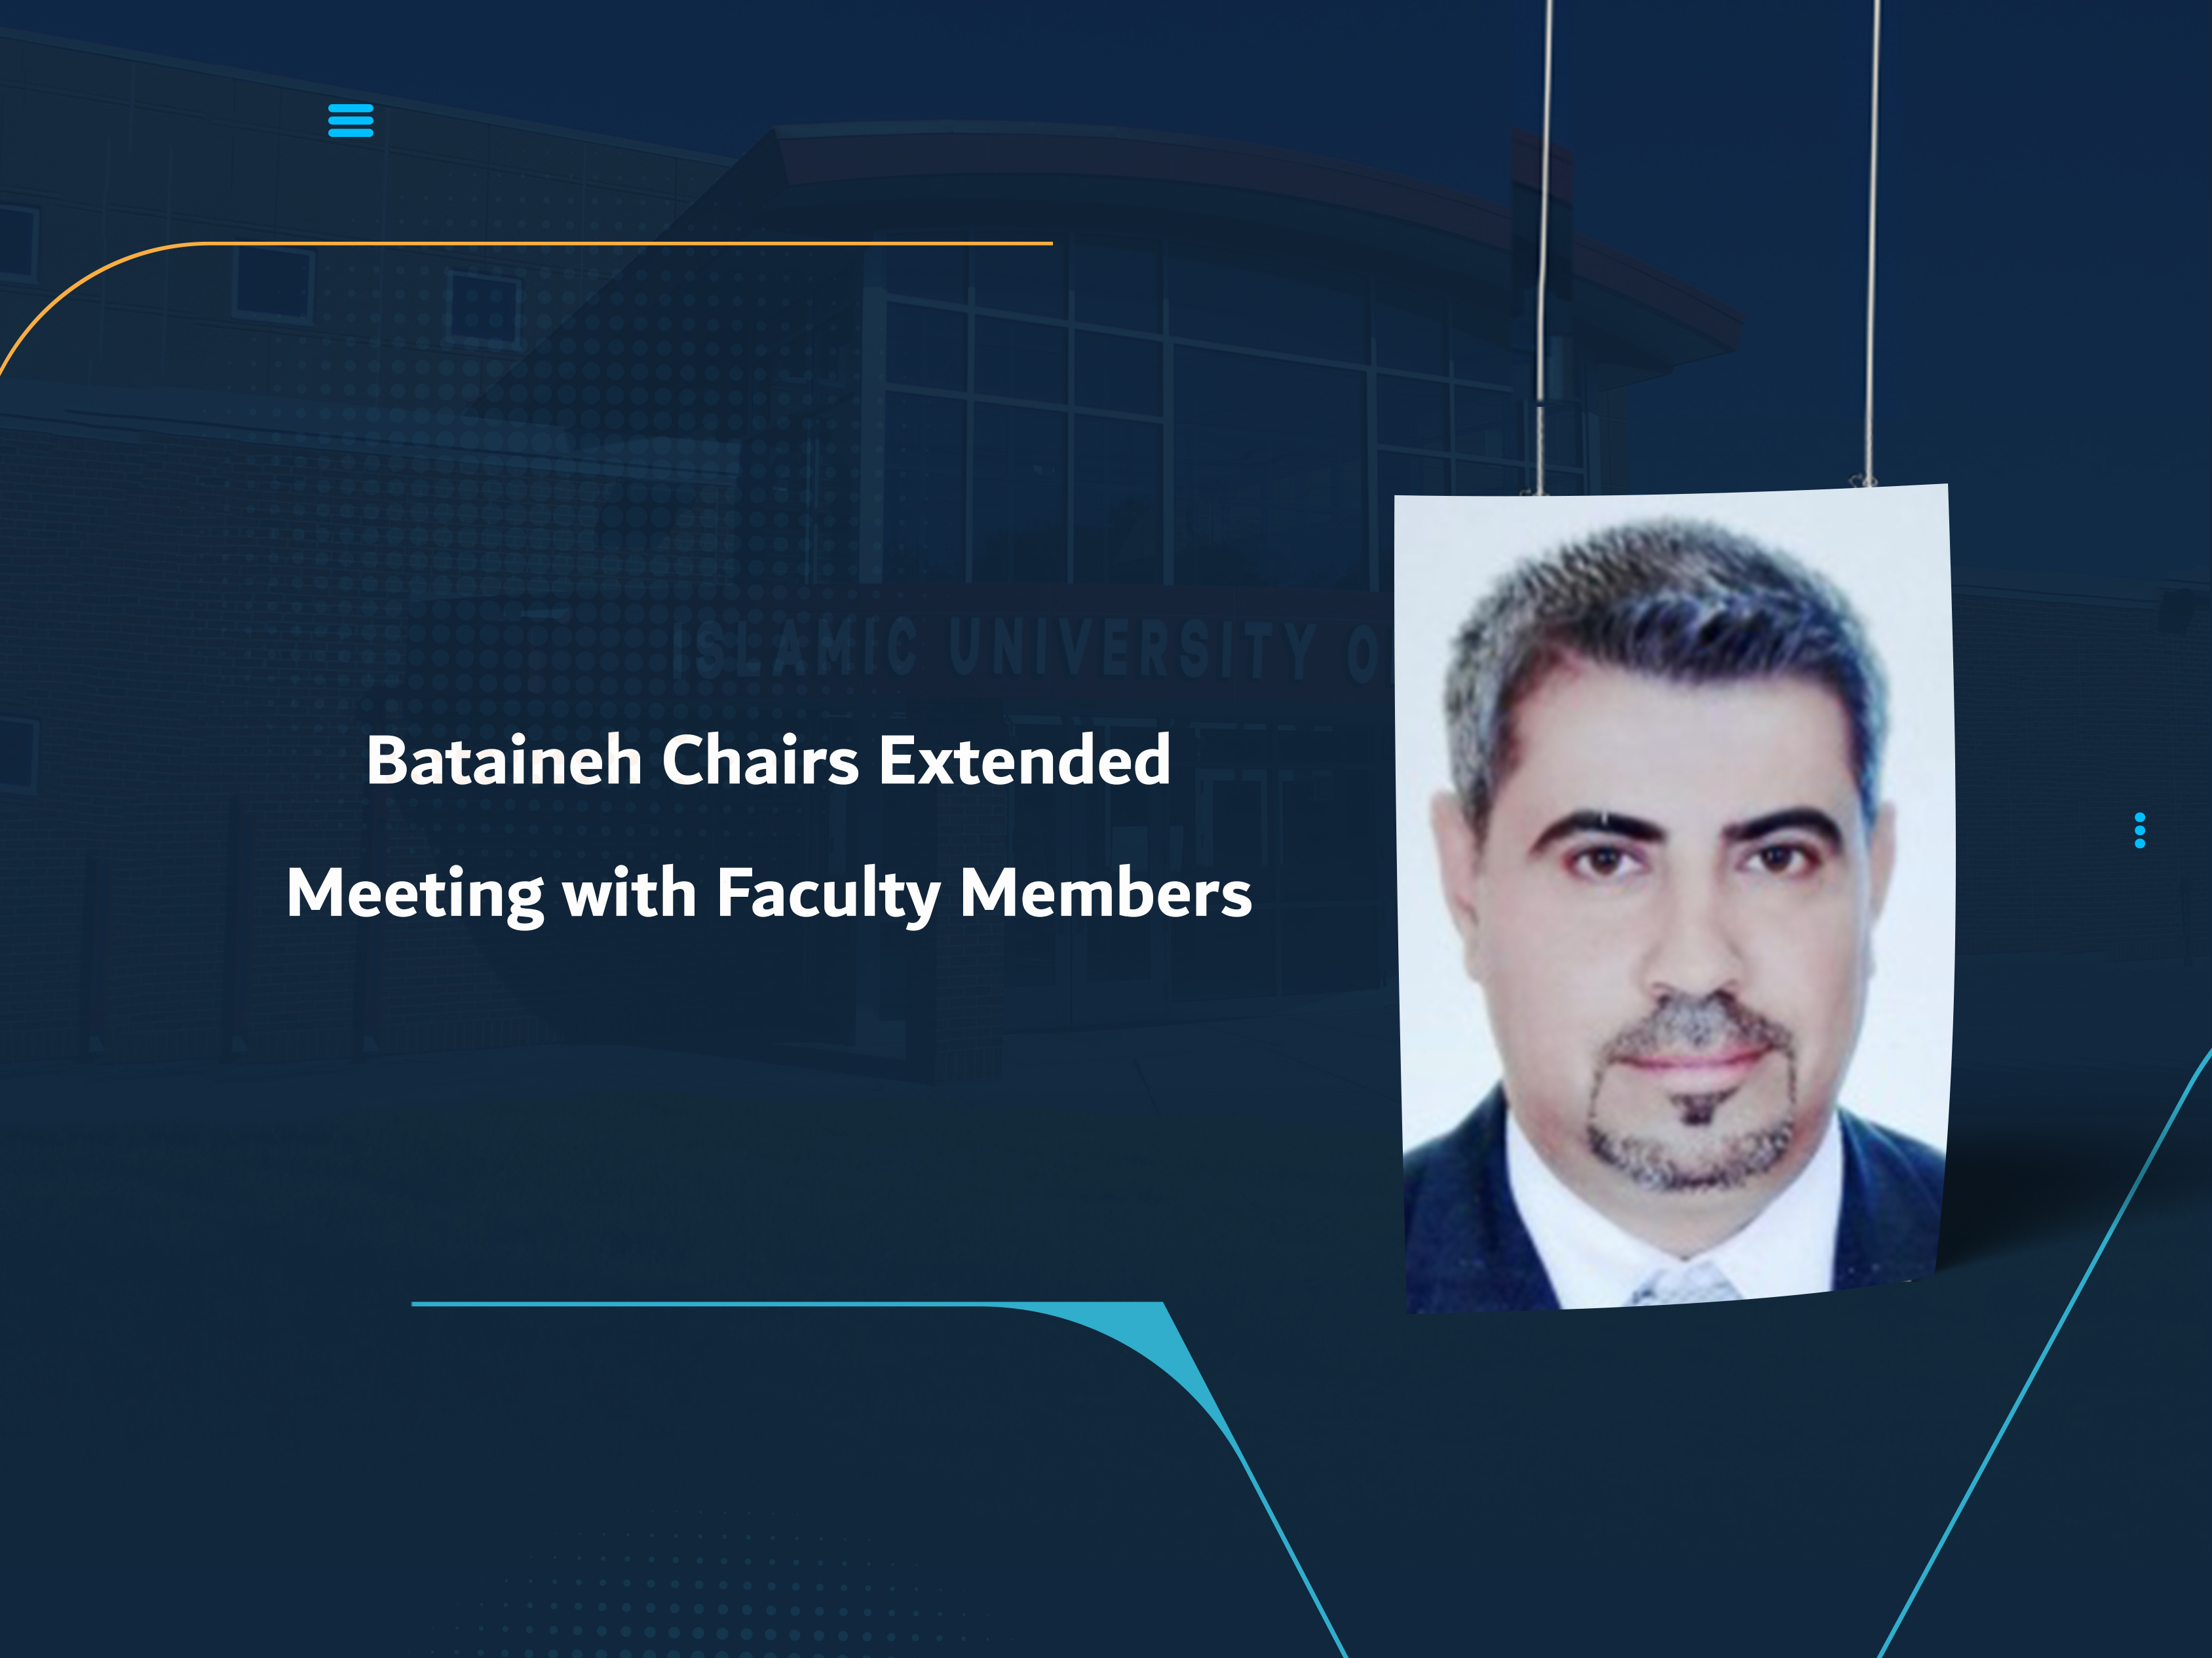 Bataineh Chairs Extended Meeting with Faculty Members